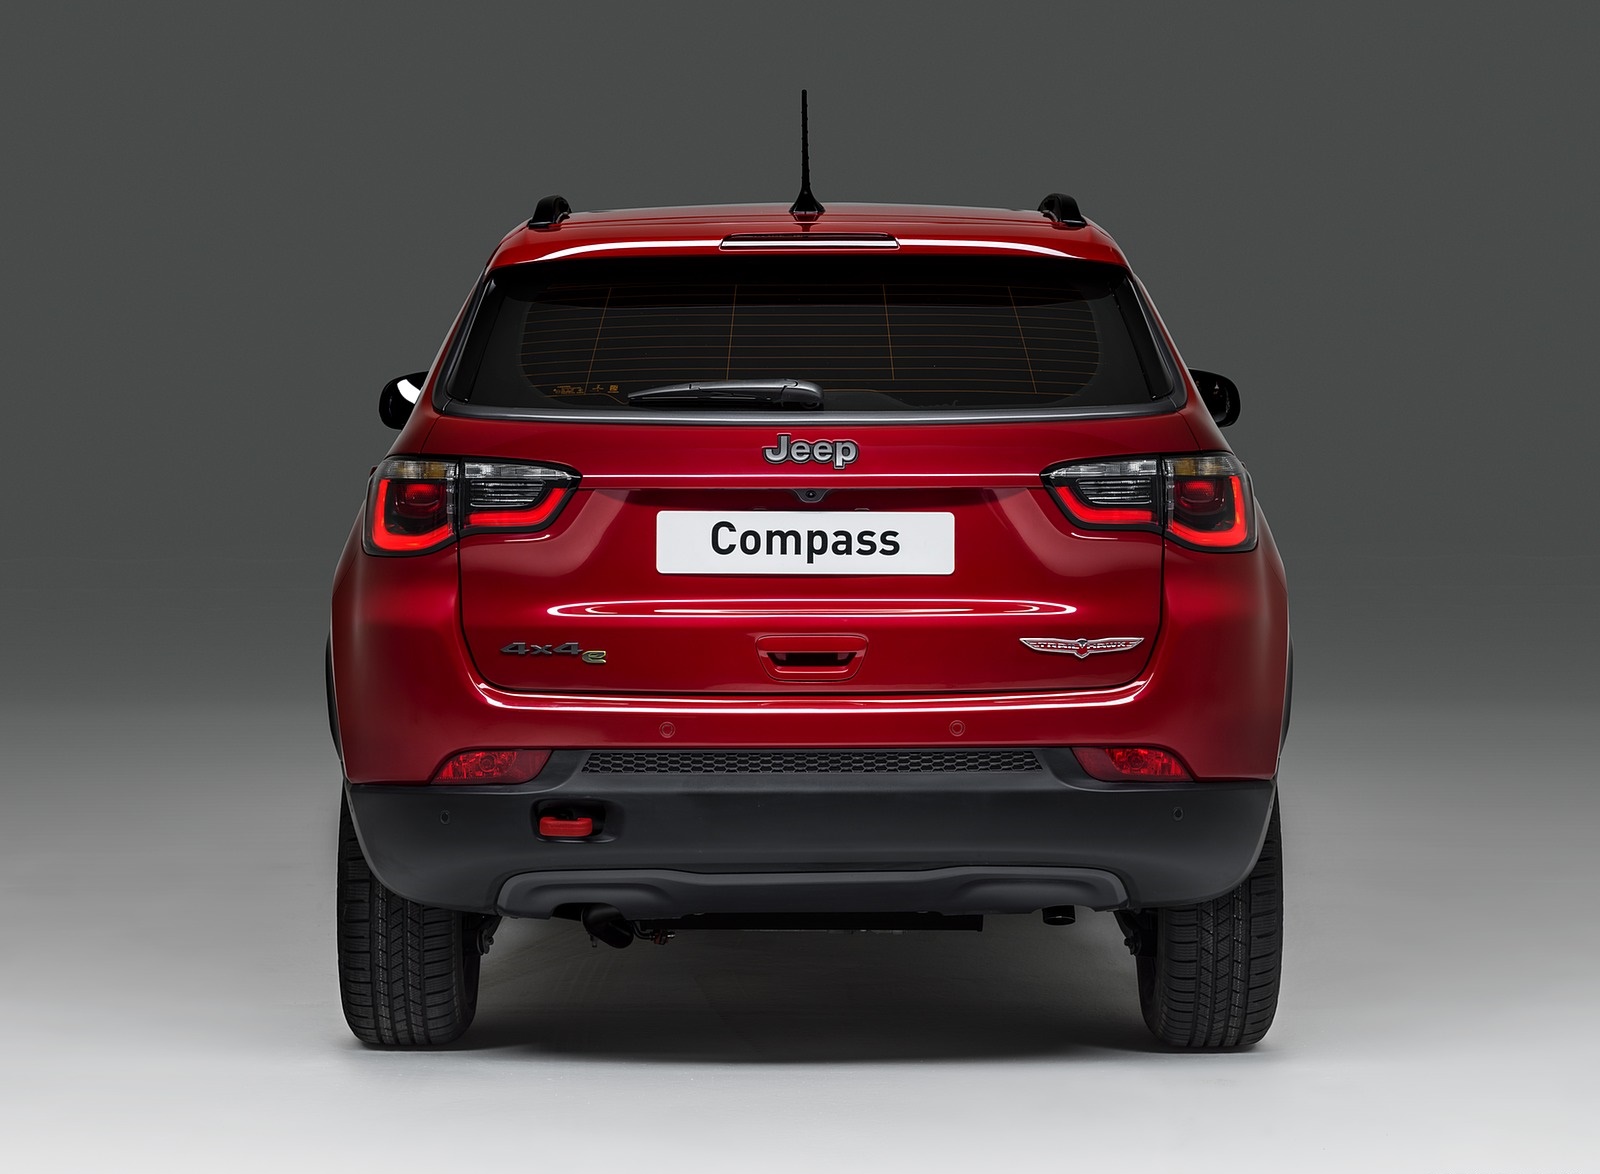 2020 Jeep Compass PHEV Rear Wallpapers (2)